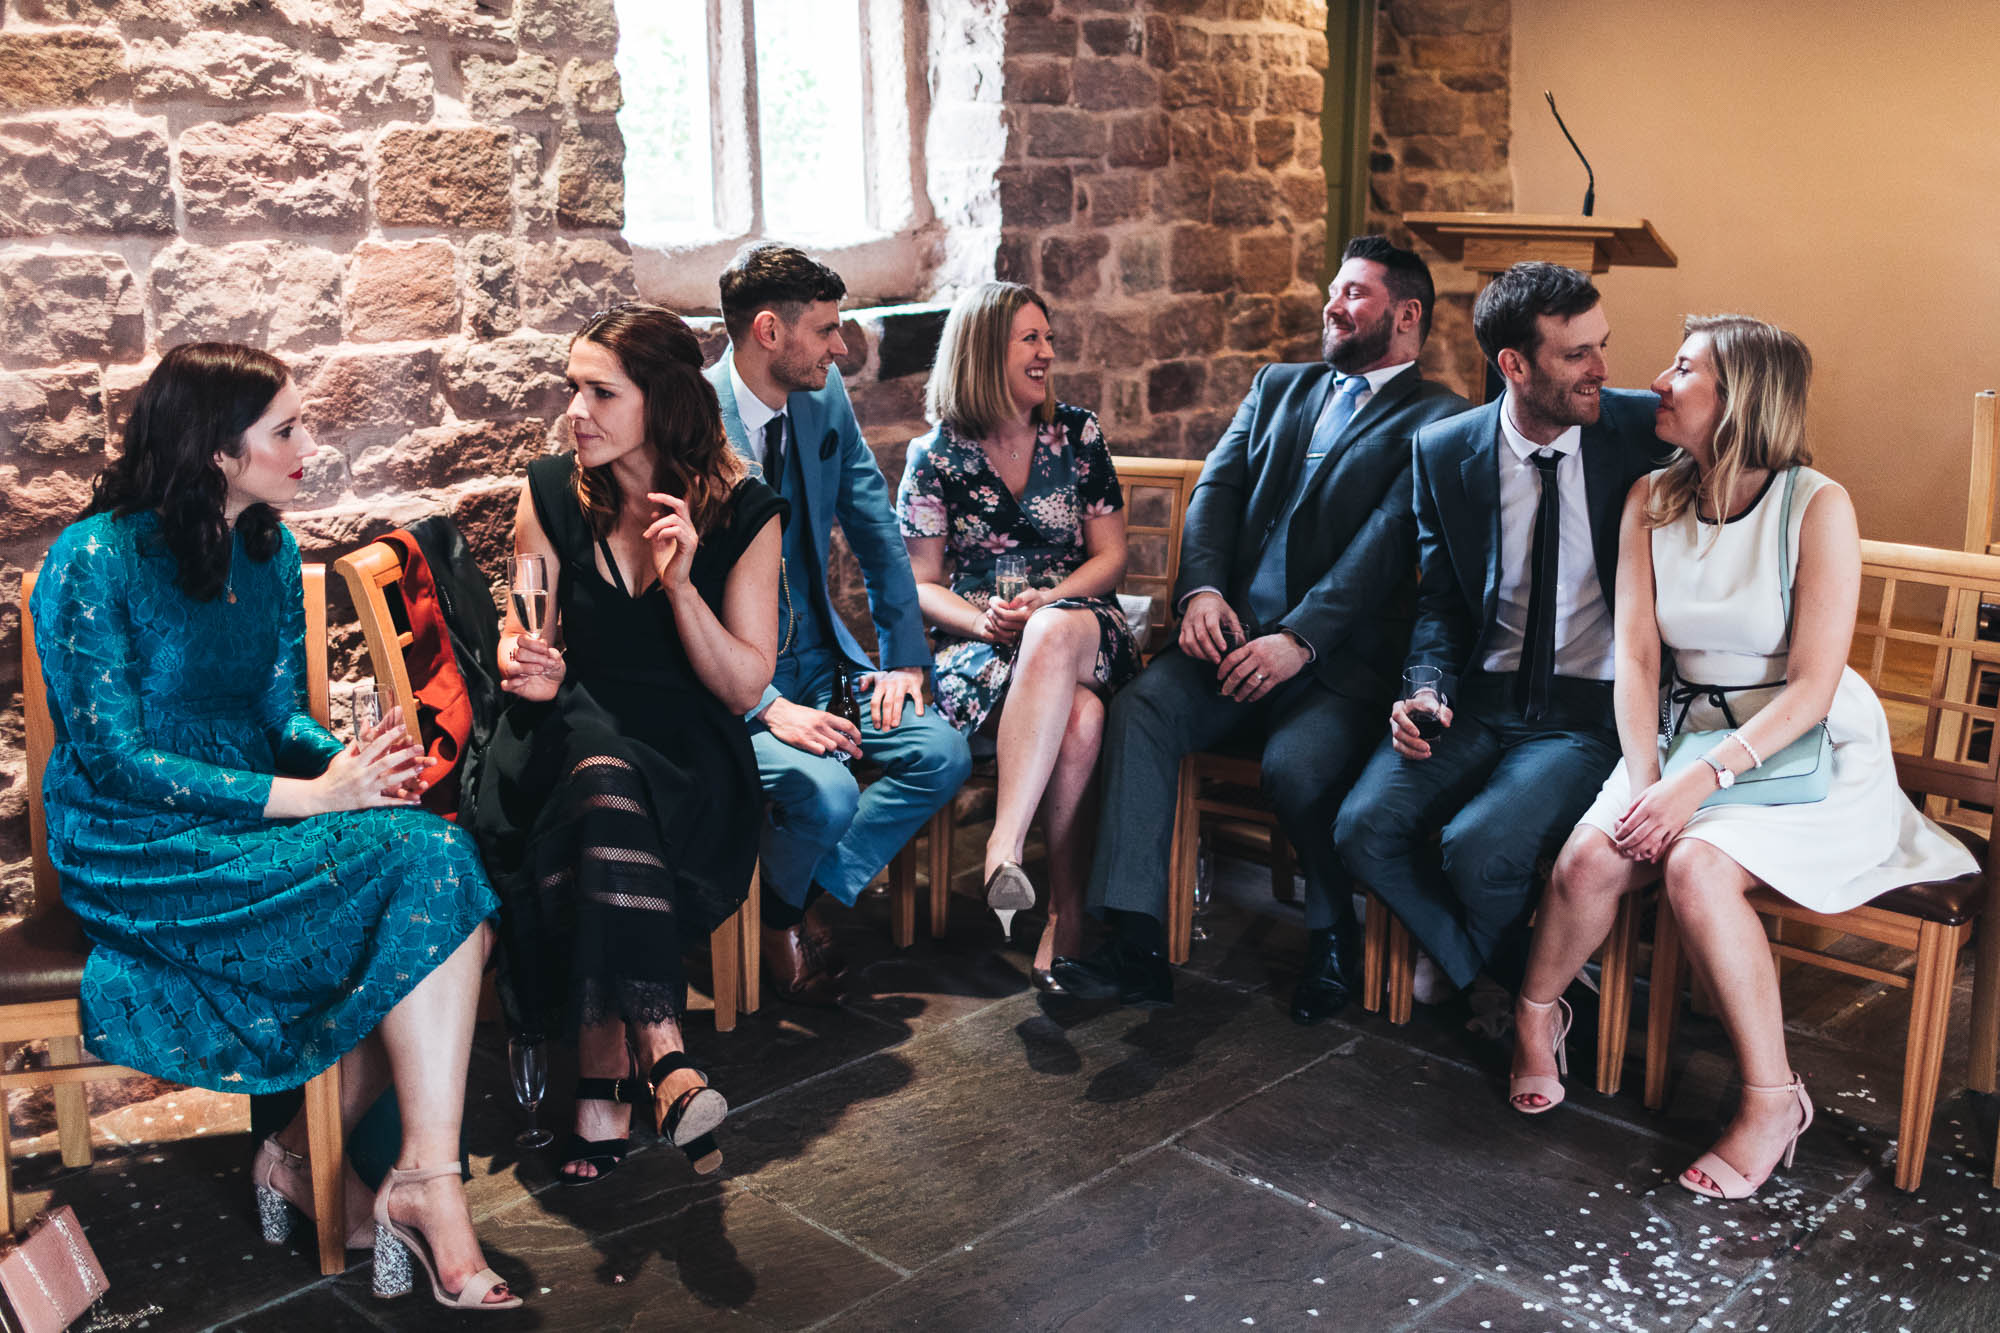 Group shot of young wedding guests enjoying a drink and chat after wedding ceremony